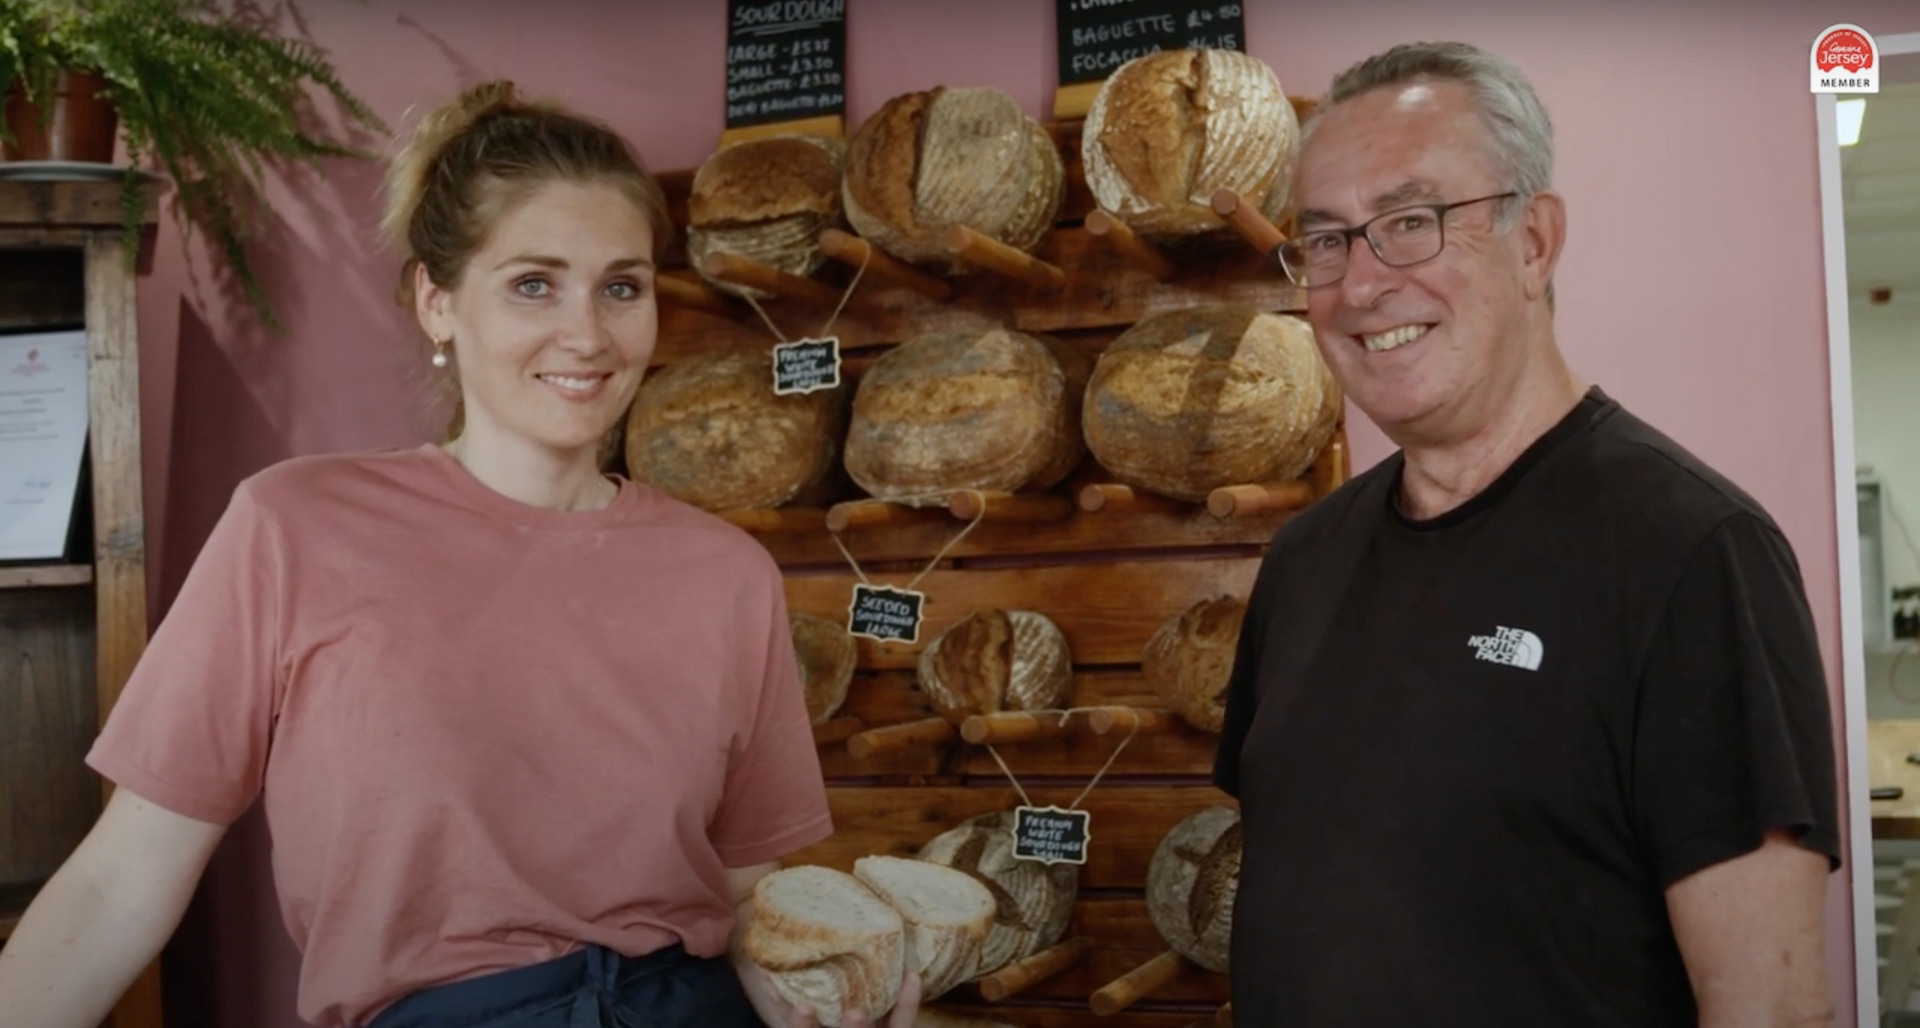 Load video: Four bakery Jersey Promo Video